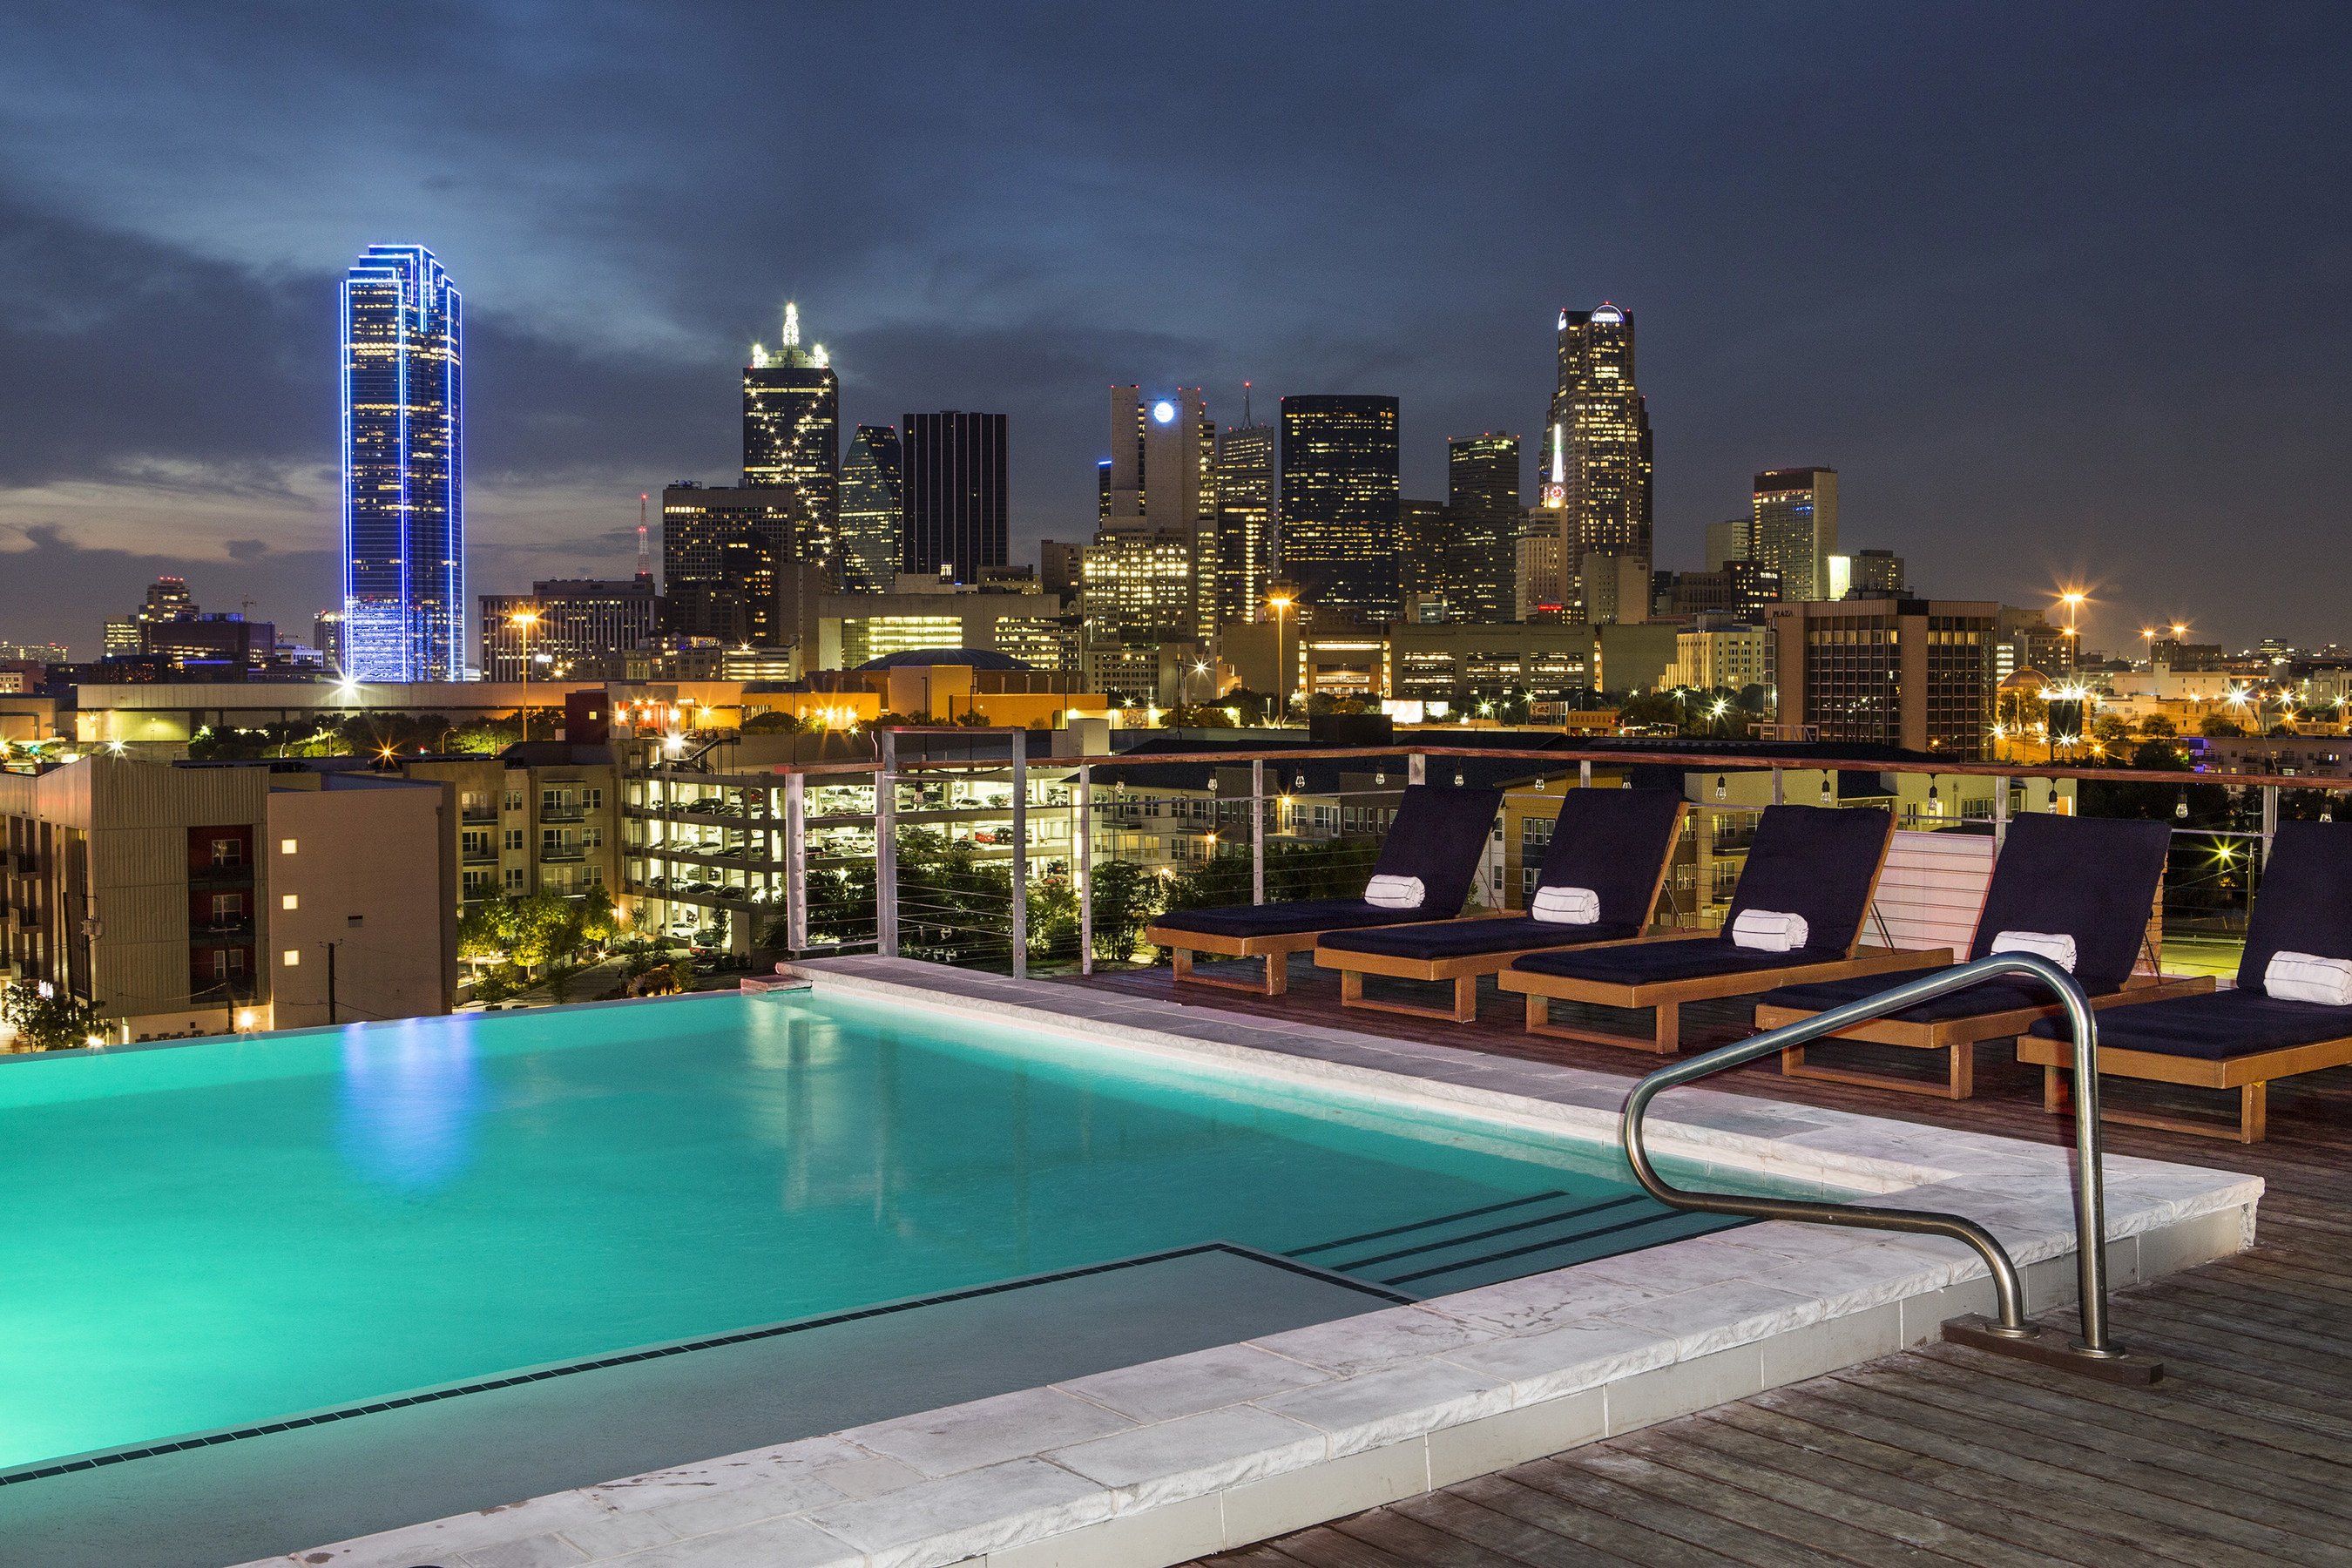 The Canvas Hotel Dallas is set to open Jan 1 2019 following a full-property renovation